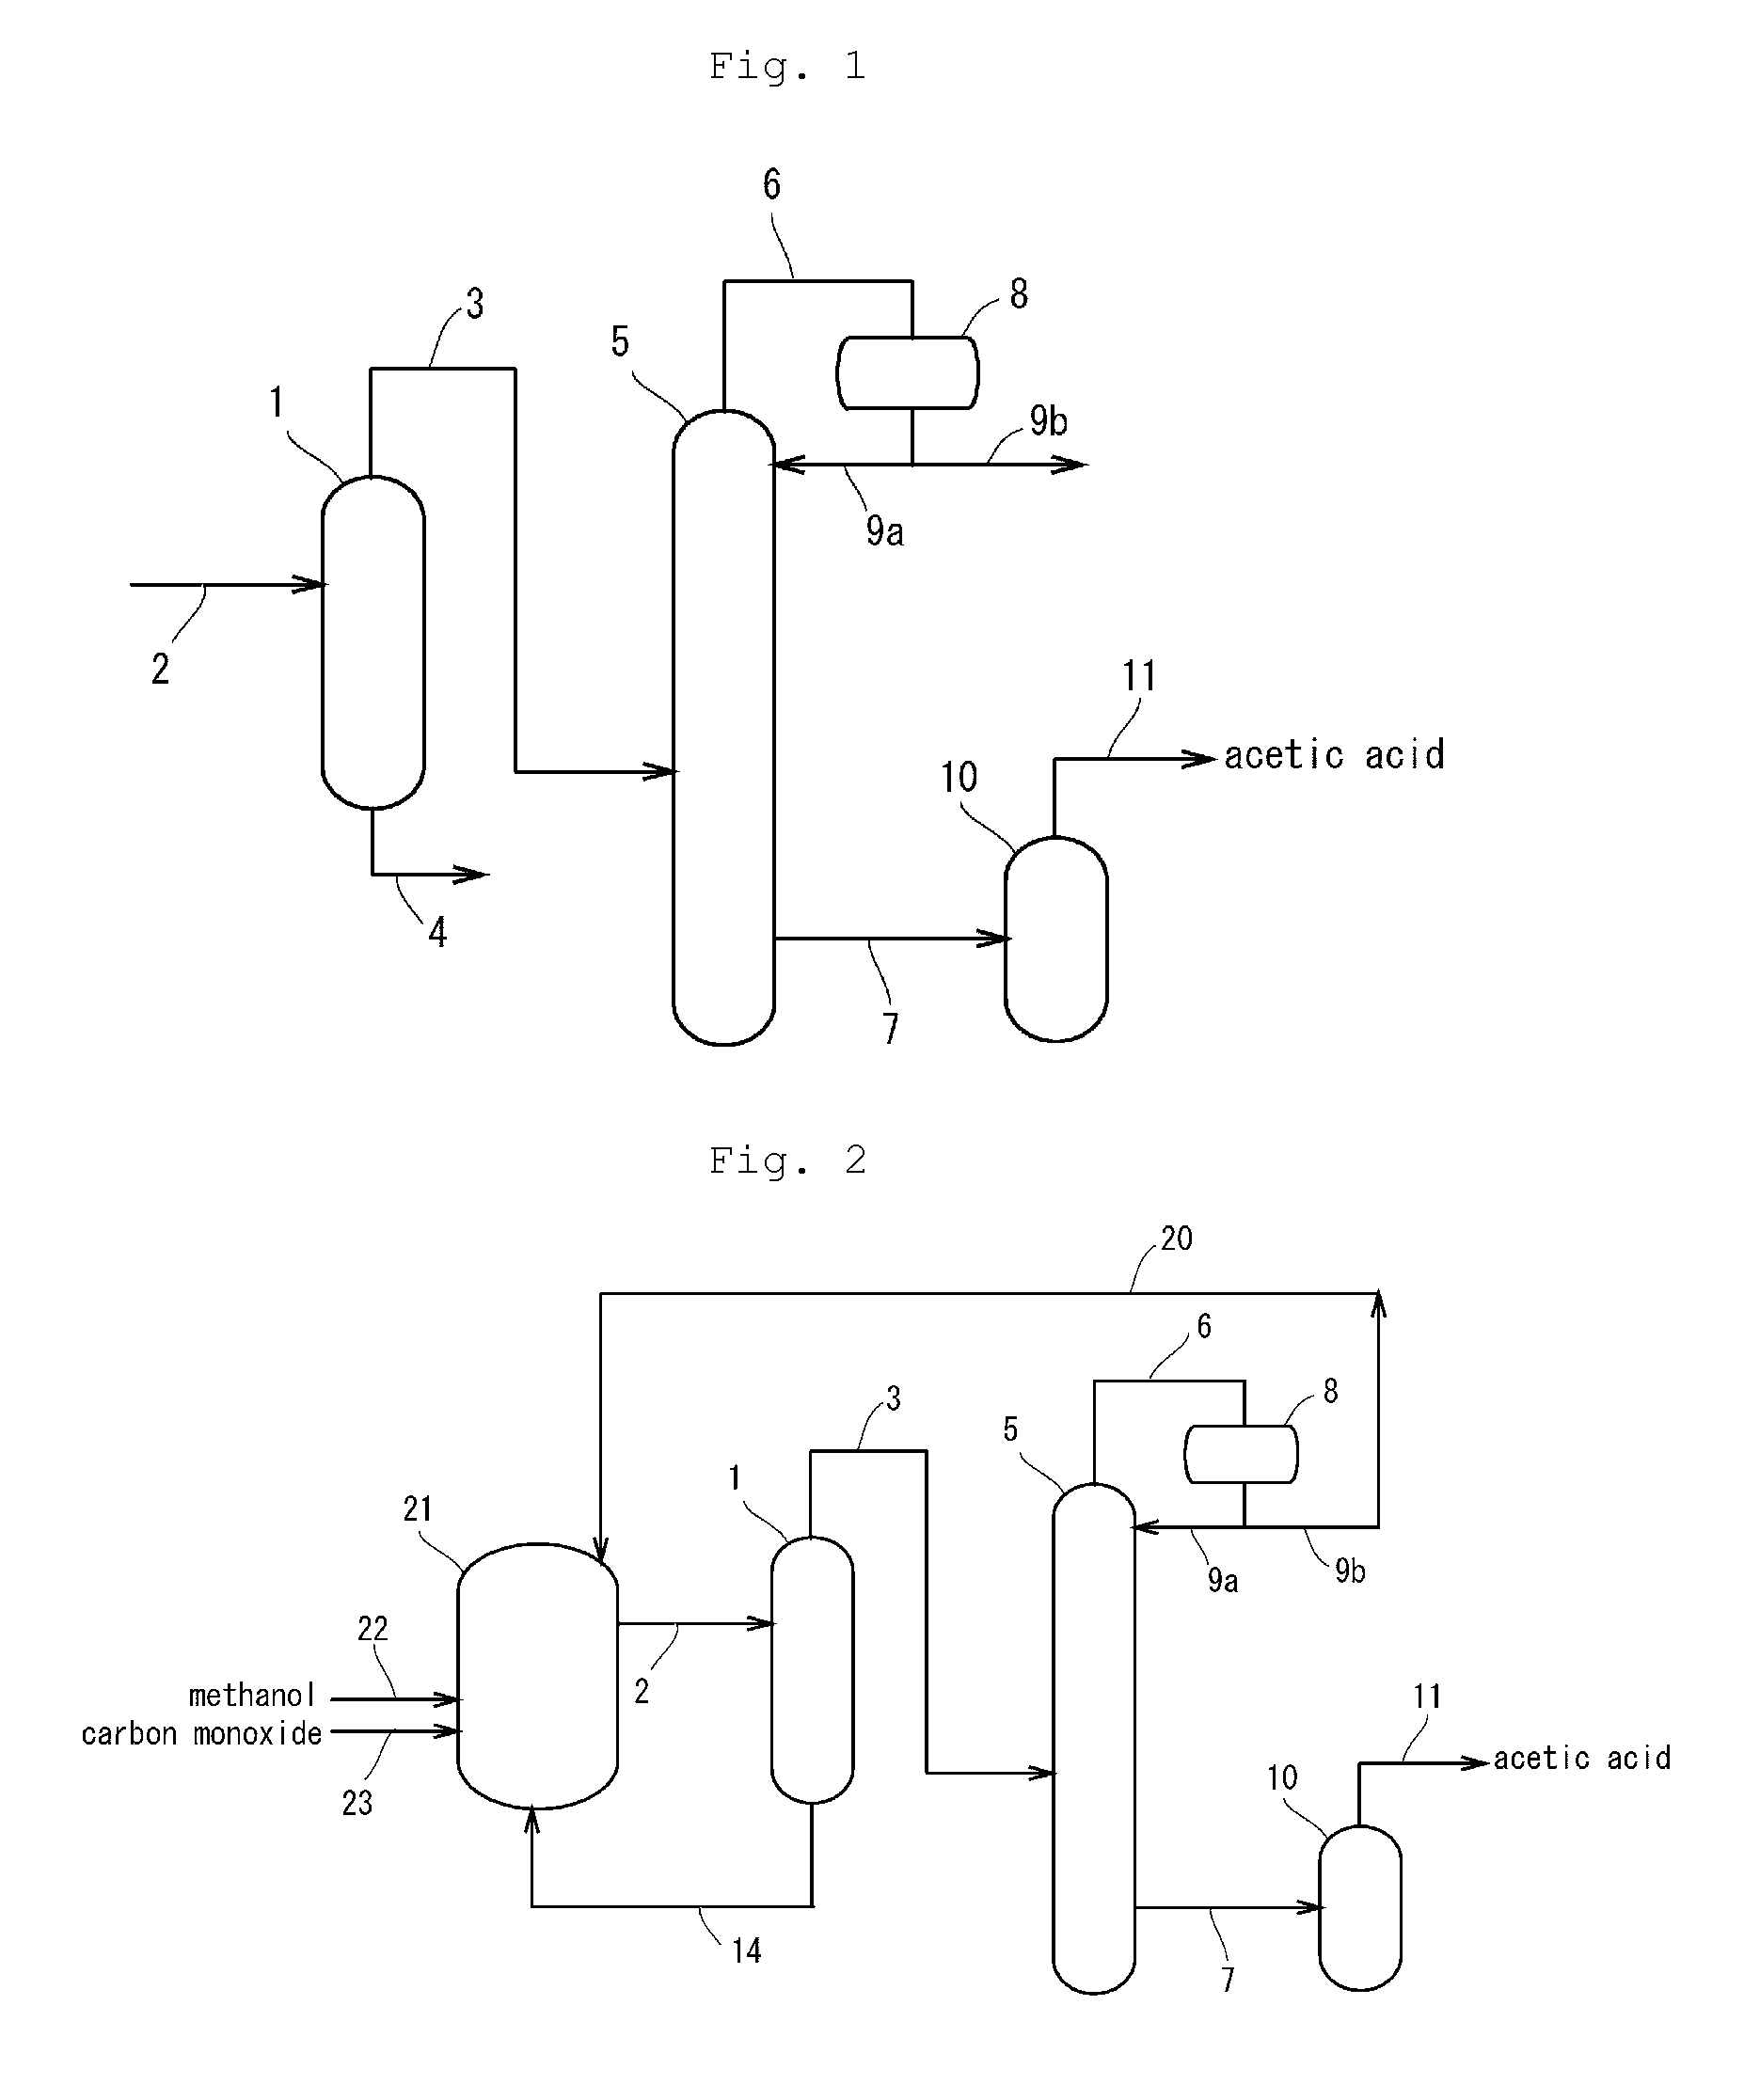 Method for manufacturing carboxylic acid